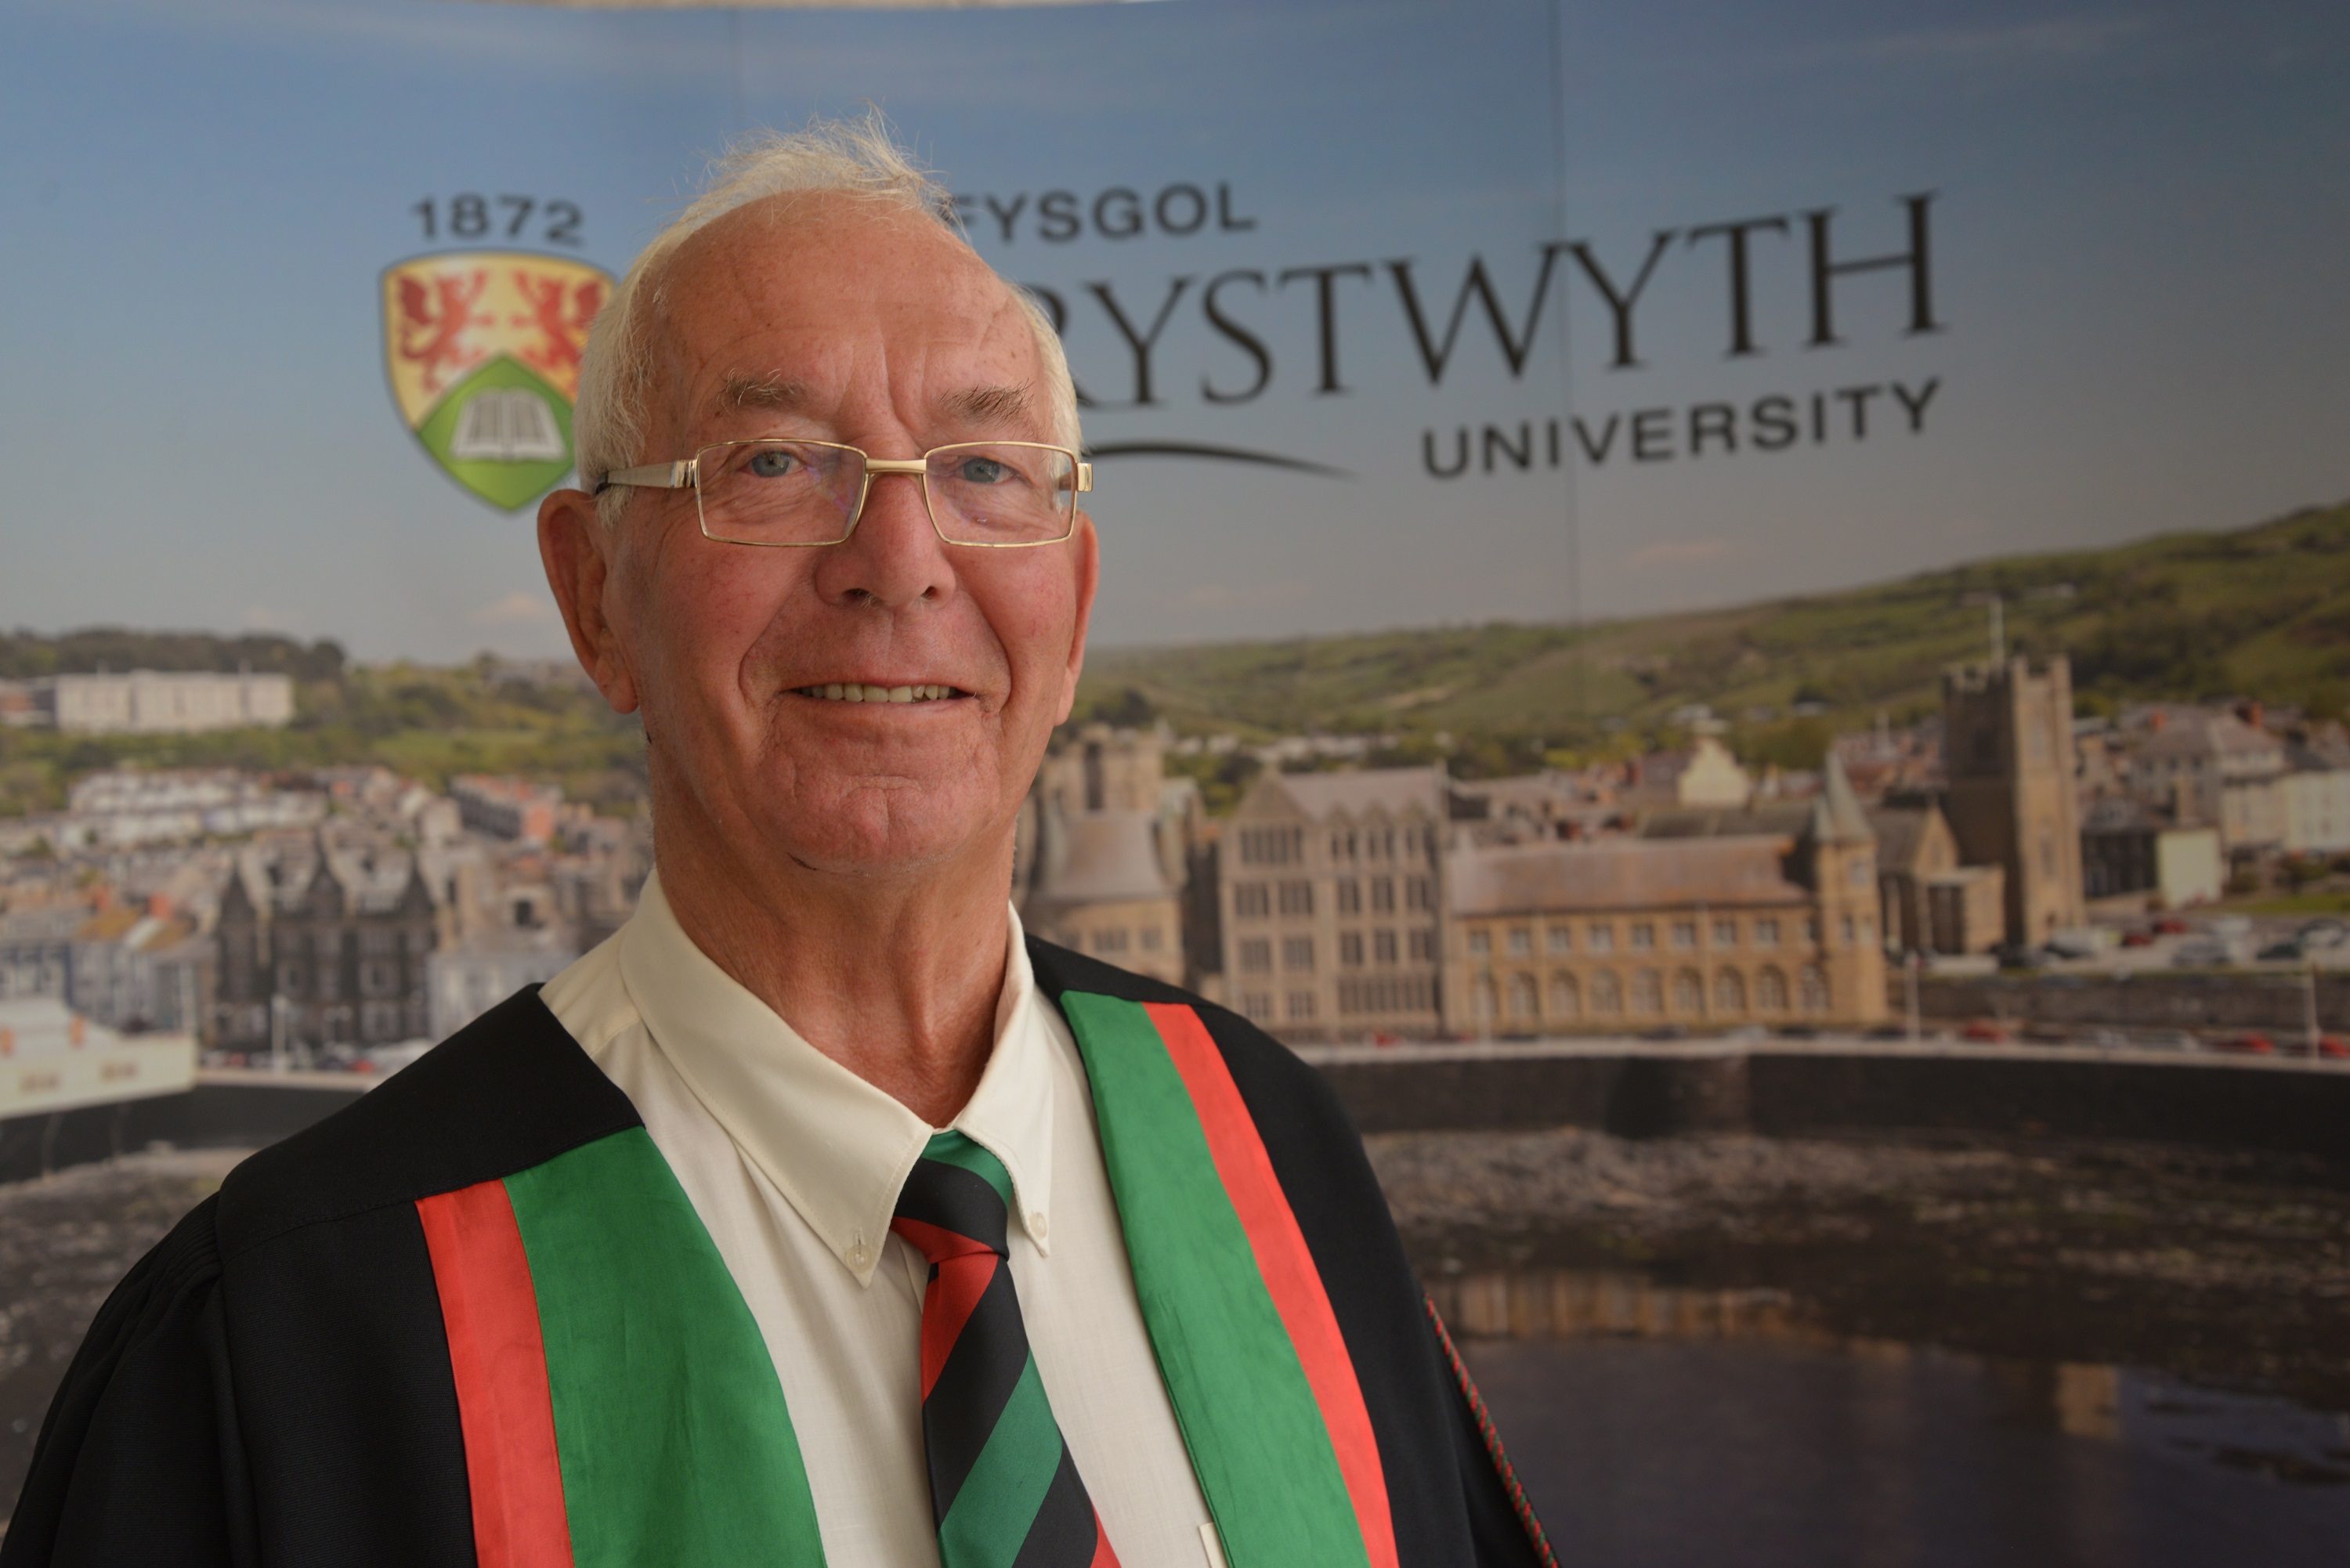 Former Welsh rugby international John Dawes was made an Honorary Fellow of Aberystwyth University during Graduation 2018.